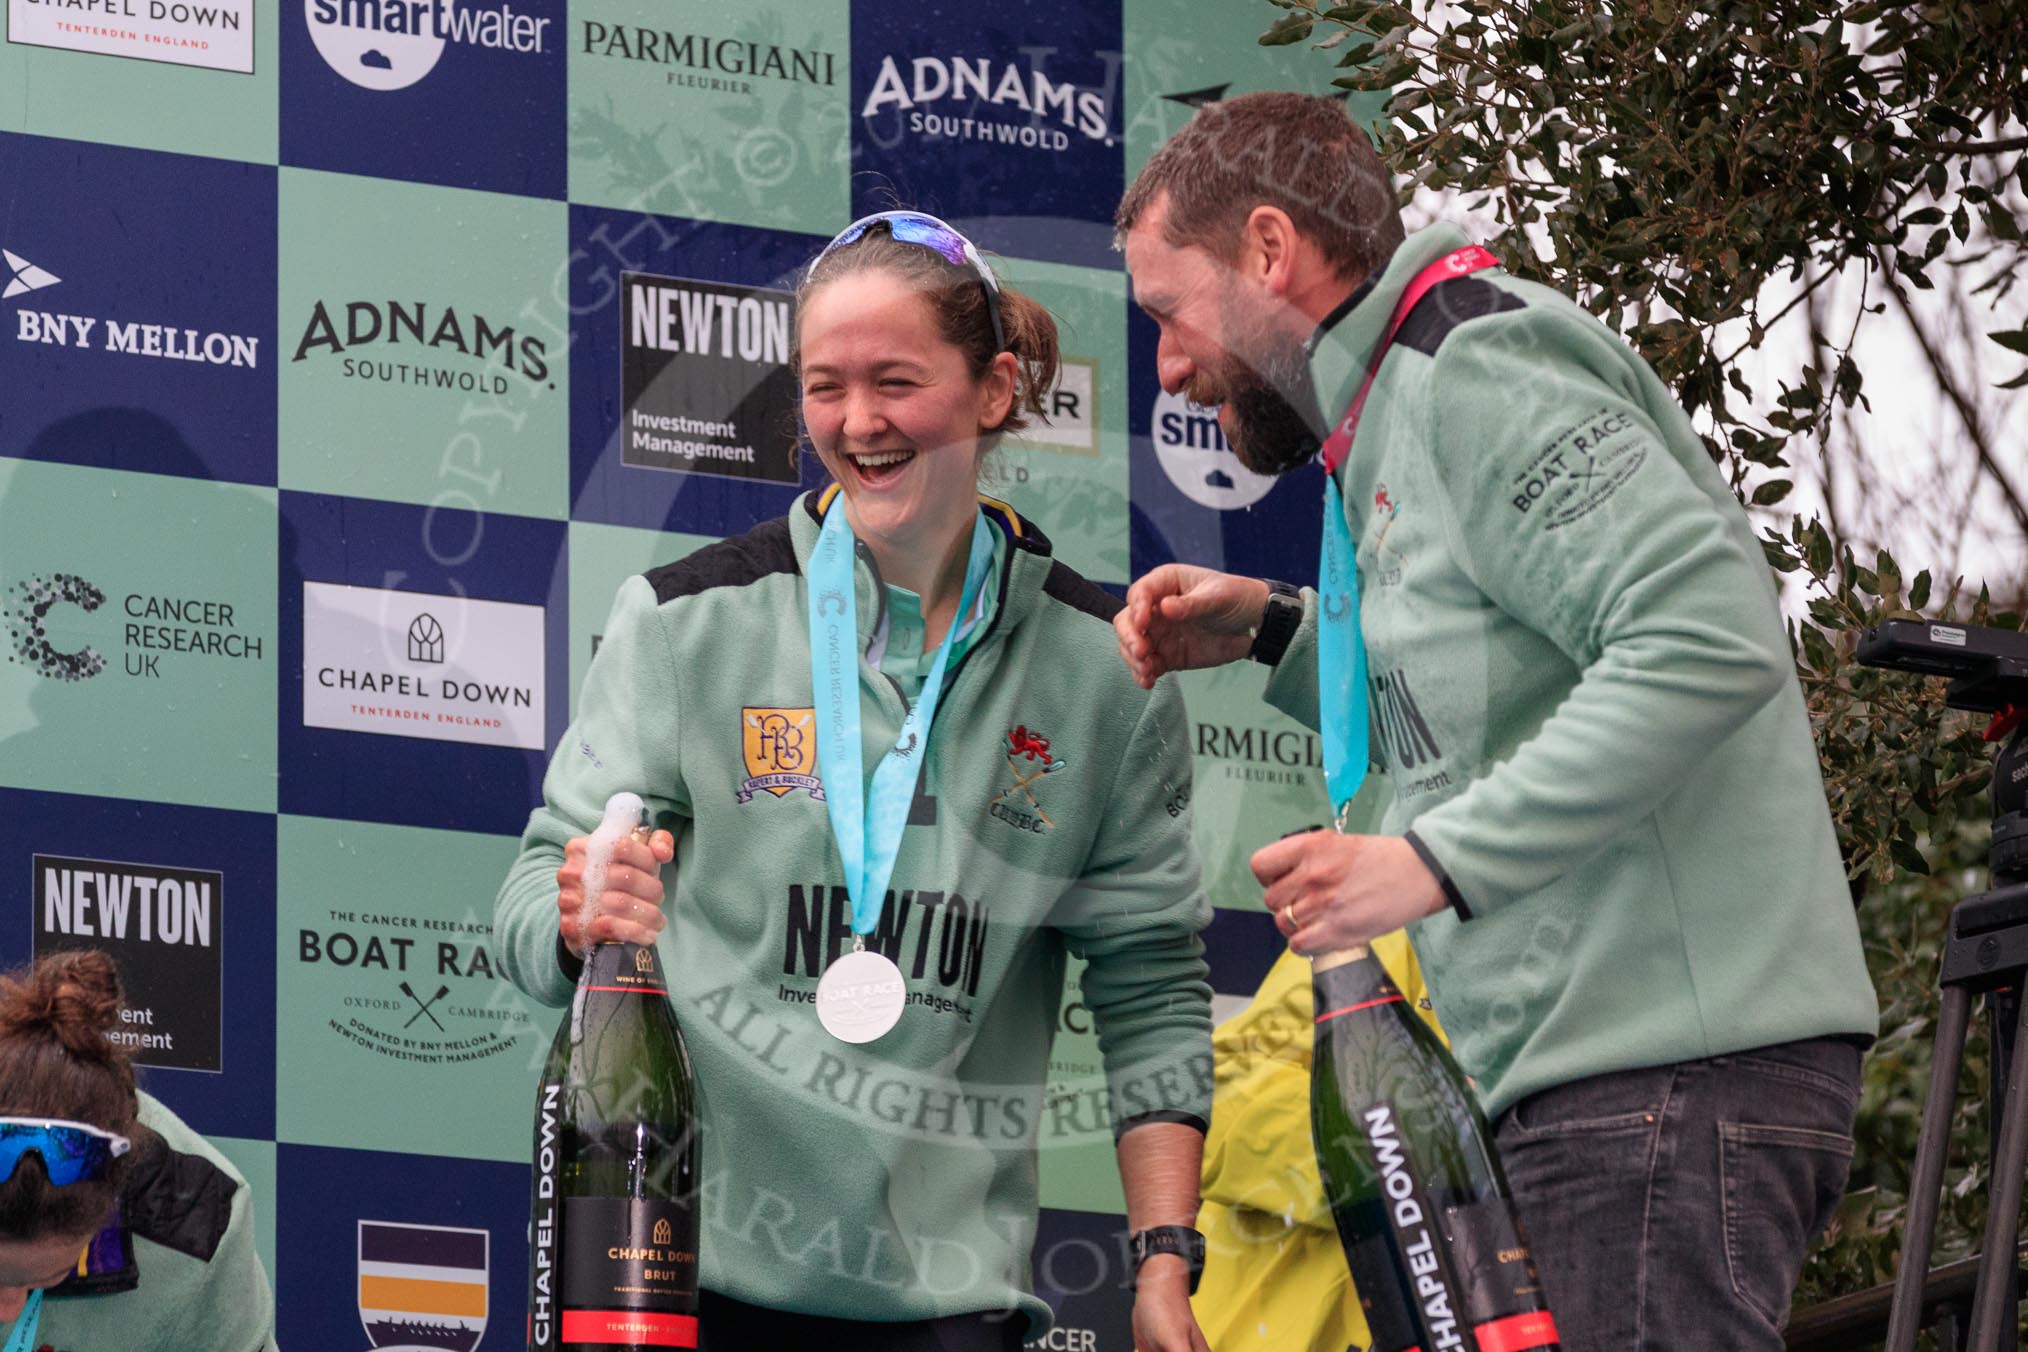 The Cancer Research UK Women's Boat Race 2018: Cambridge bow Tricia Smith, CUWBC Head Coach Rob Baker, Boat Race medals, and bottles of Chapel Down Brut.
River Thames between Putney Bridge and Mortlake,
London SW15,

United Kingdom,
on 24 March 2018 at 17:09, image #287